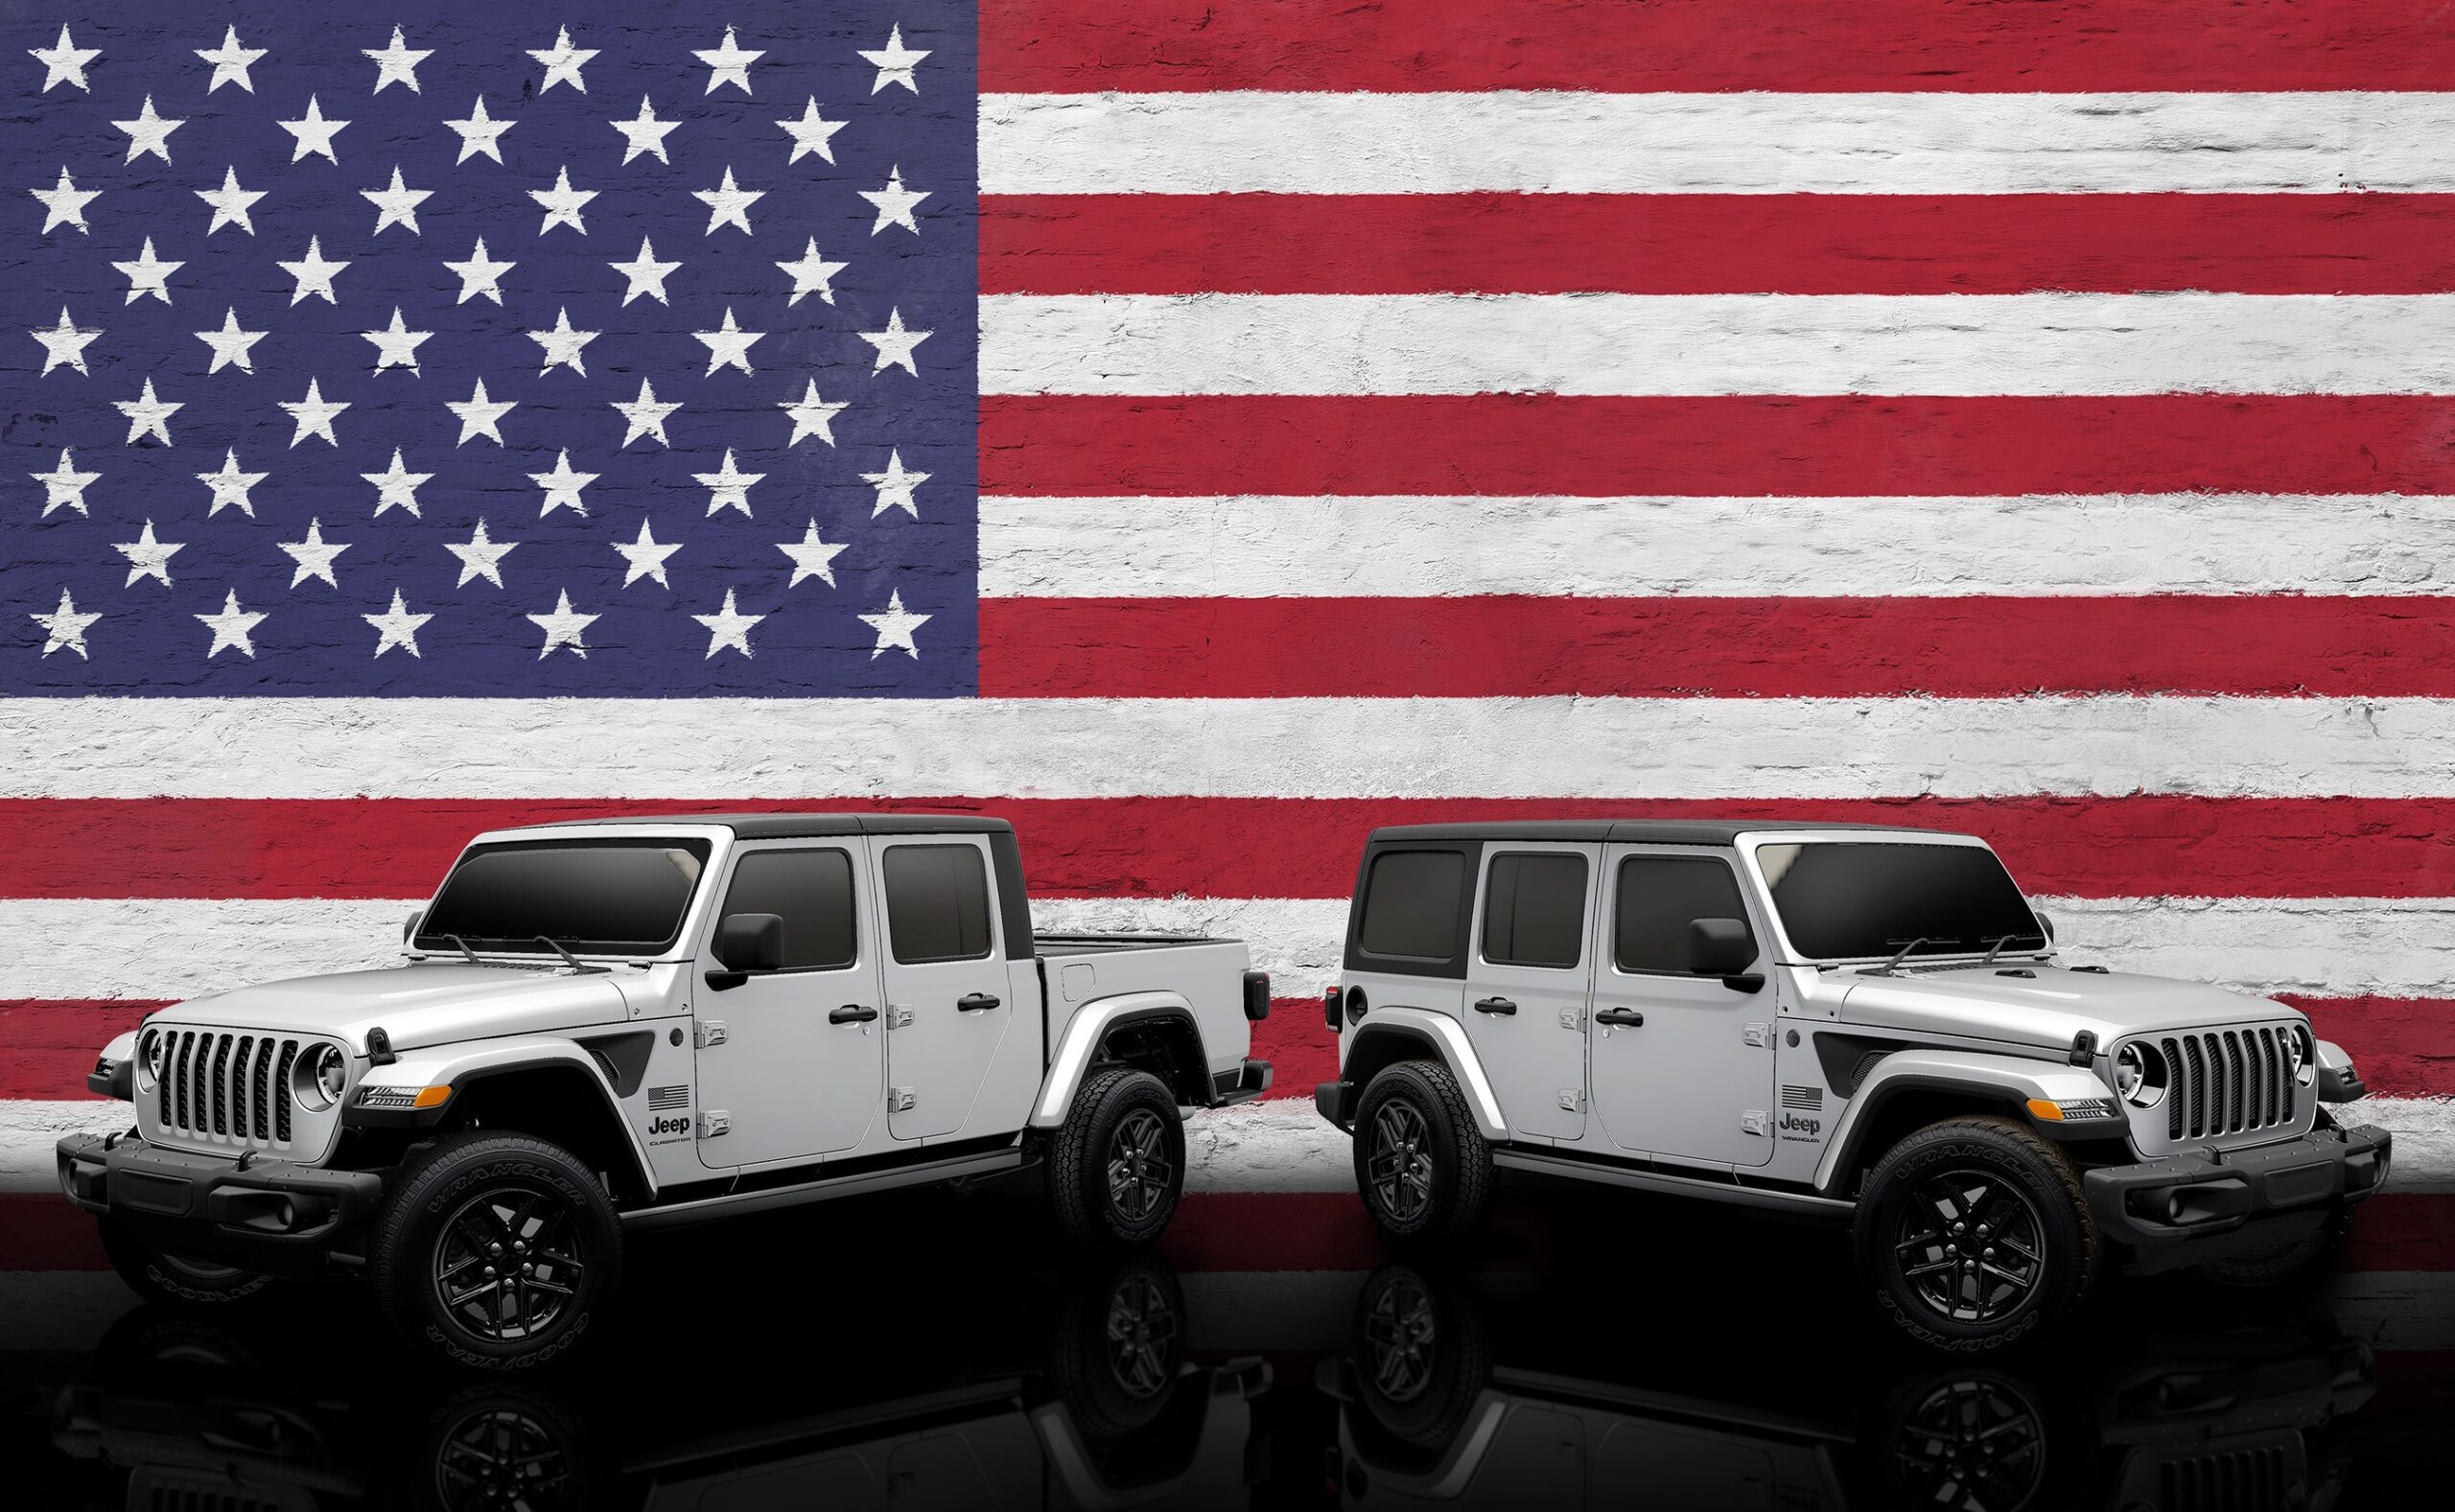 Jeep® Brand Salutes Military Members With Special Veterans Day Incentive Through End of November